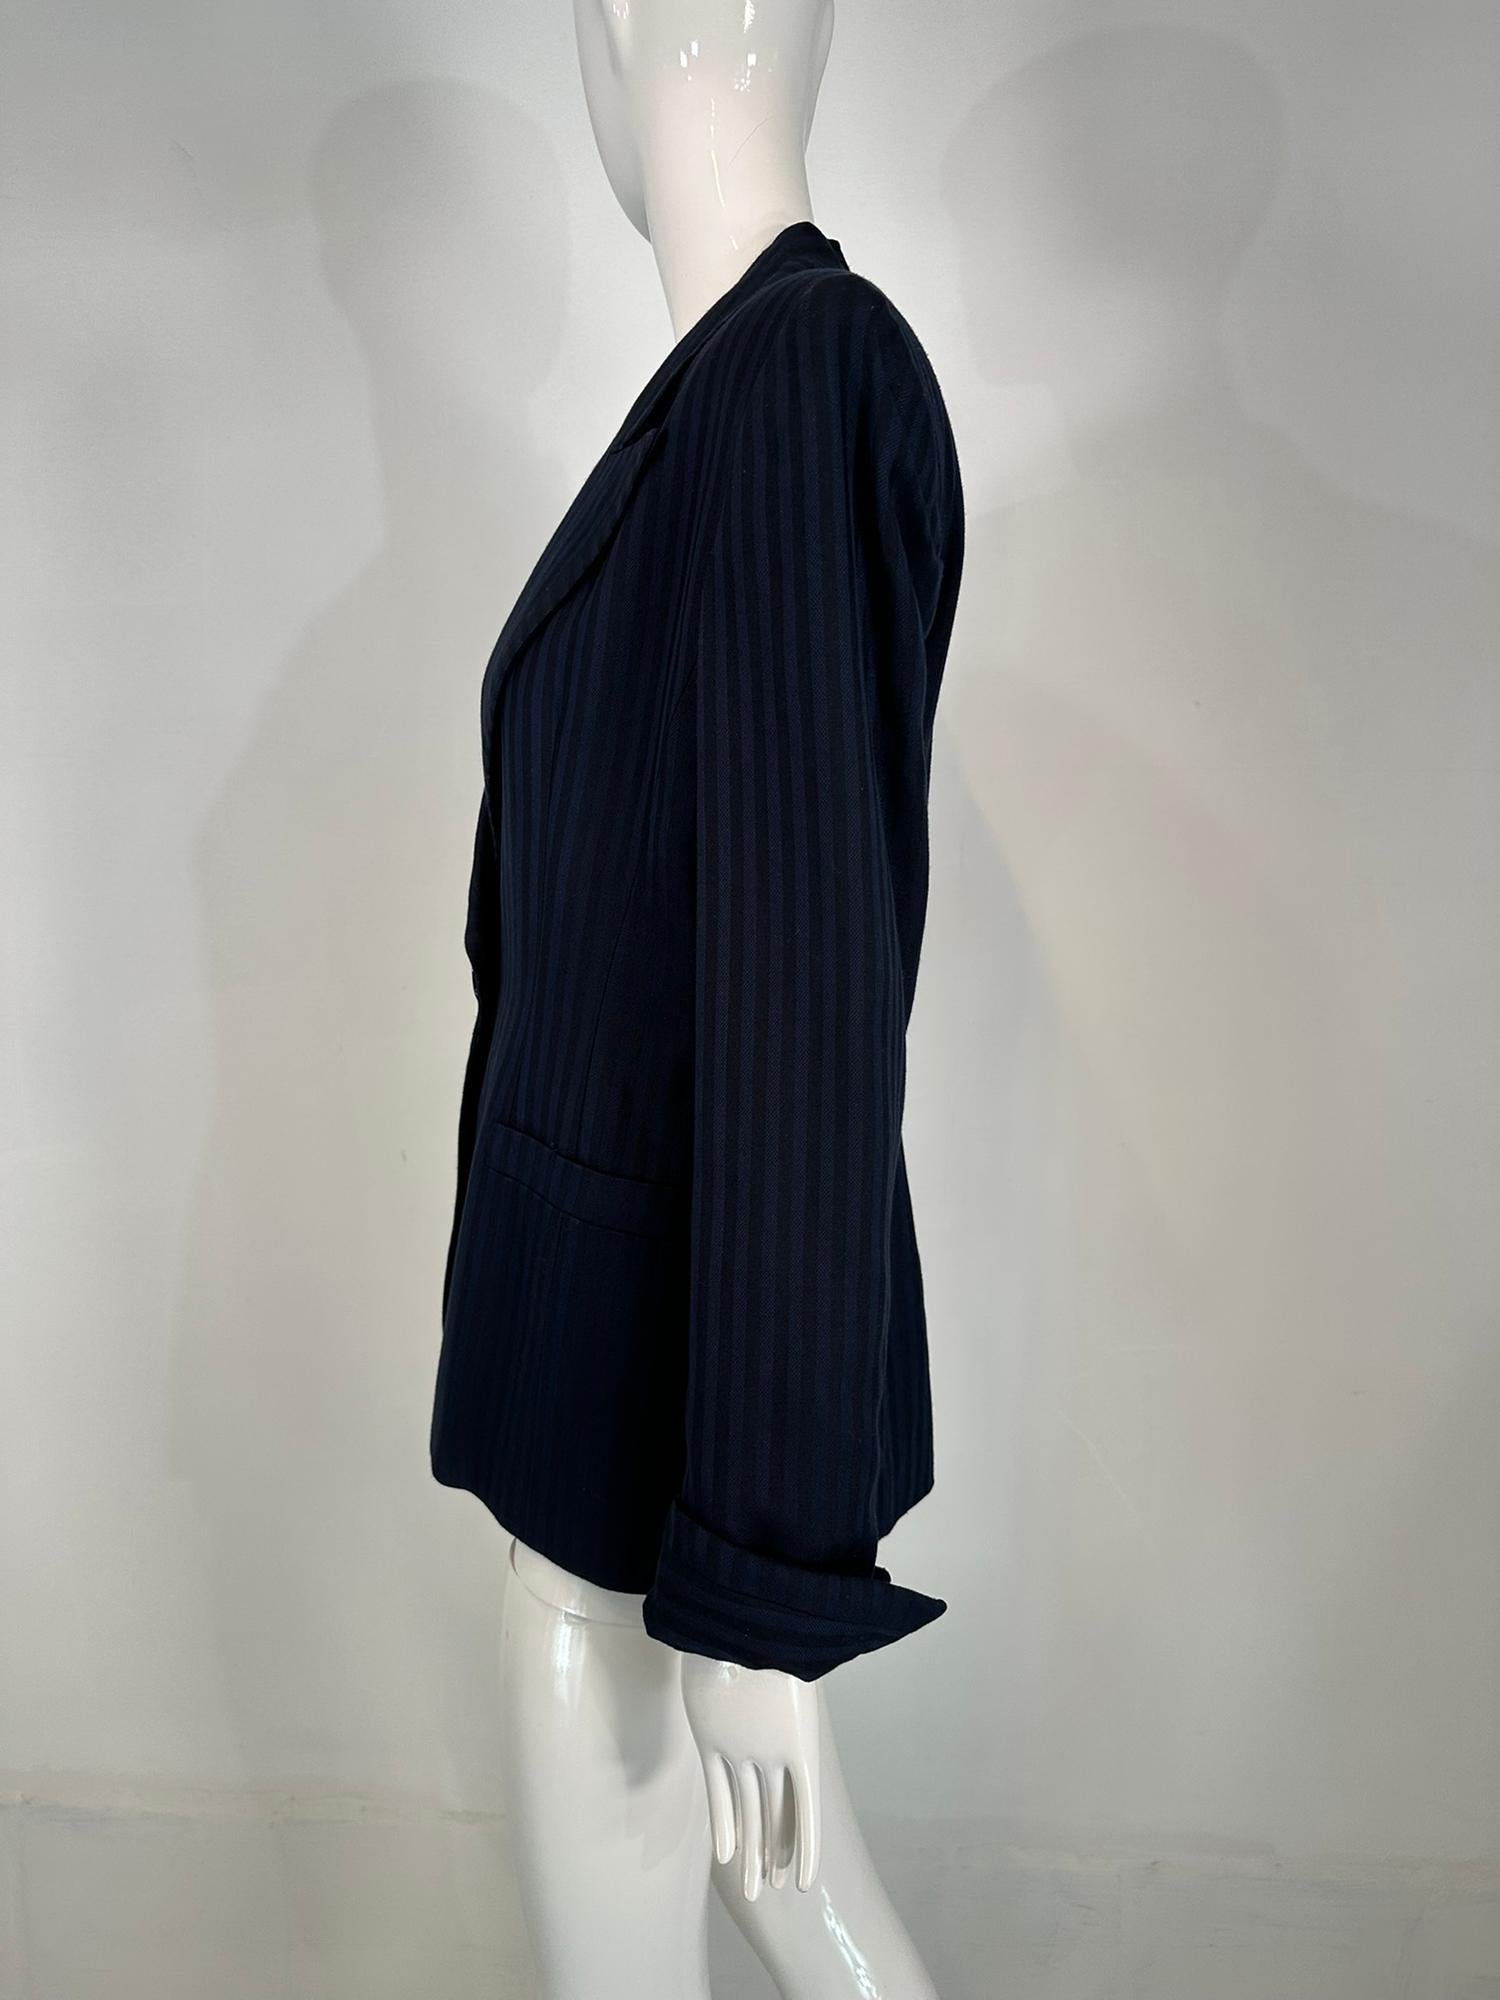 Christian Dior Navy Blue & Black Wide Stripe Wool Twill Jacket Late 90s-2000s 4 For Sale 6